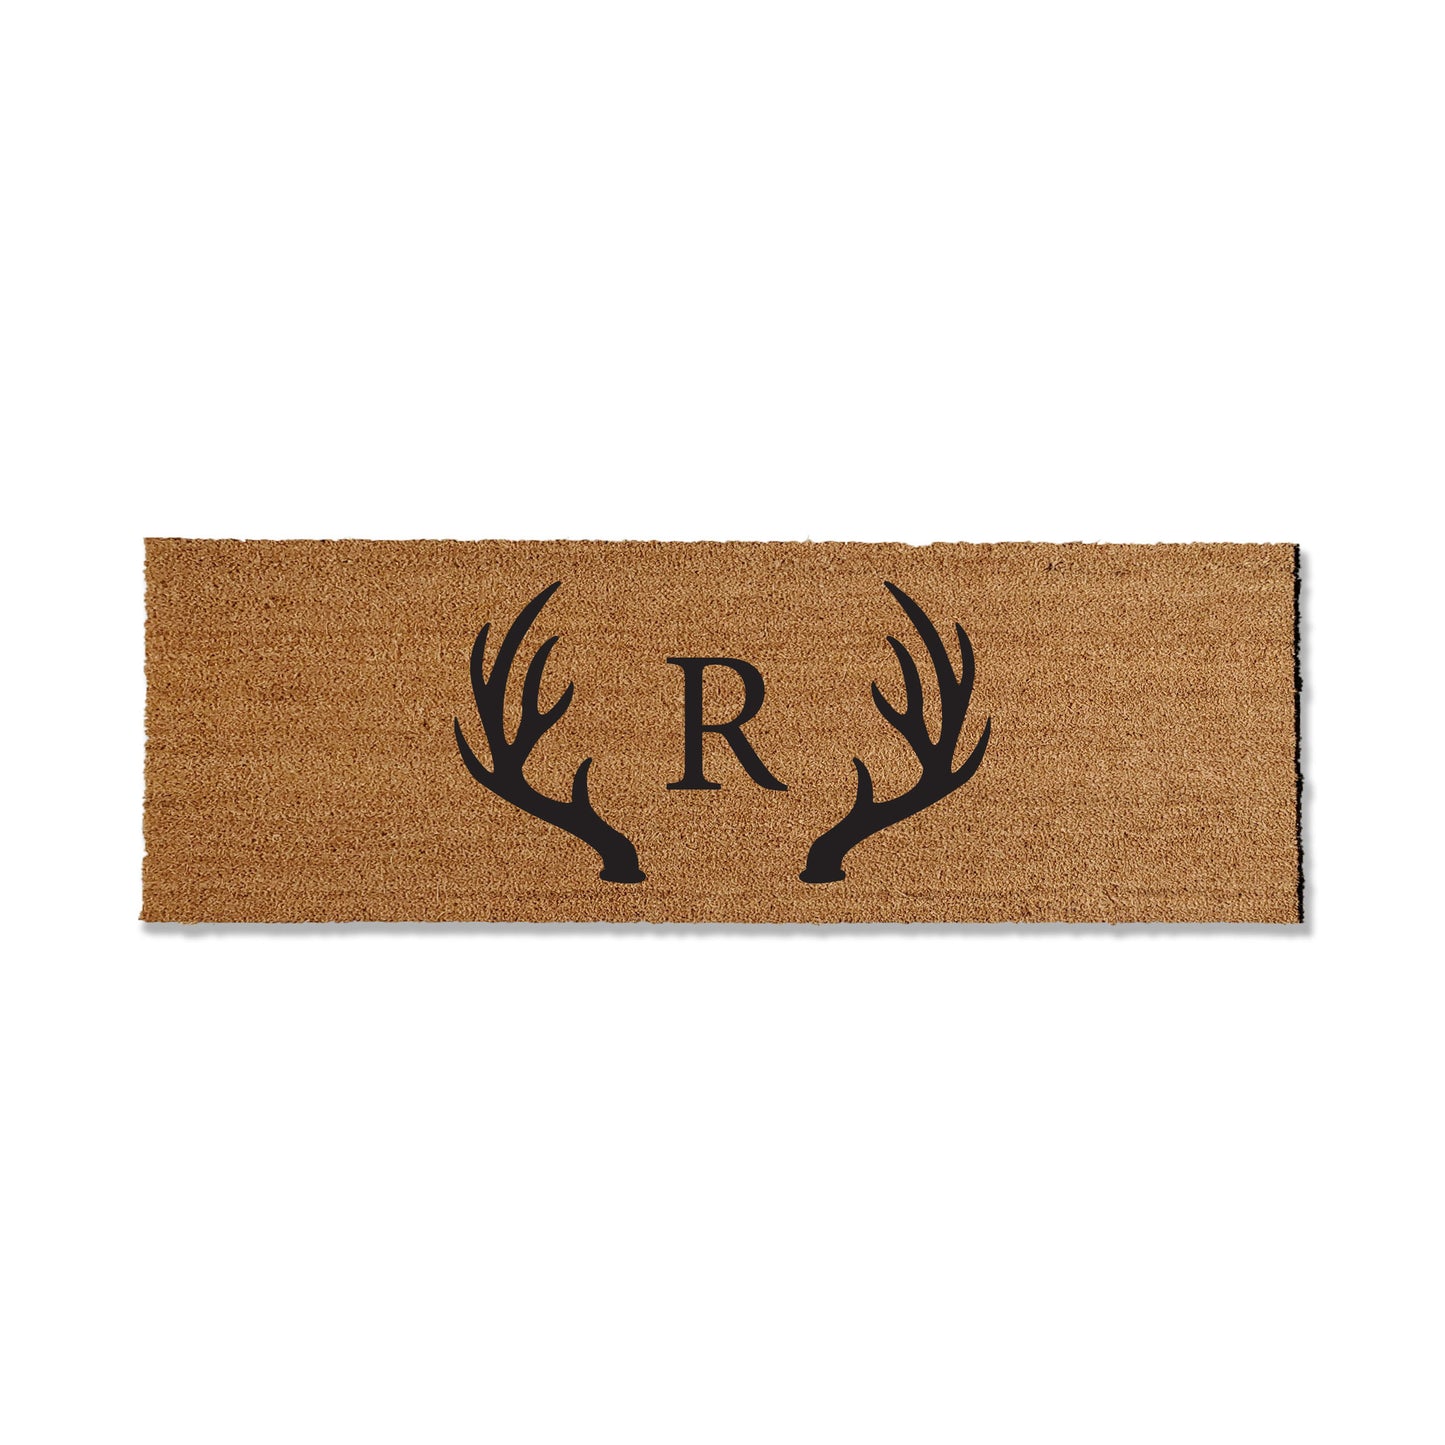 Elevate your entryway with our custom coir doormat, offered in various sizes. Featuring your last name initial in the center, framed by antlers, this personalized touch adds a warm and inviting atmosphere to your home.